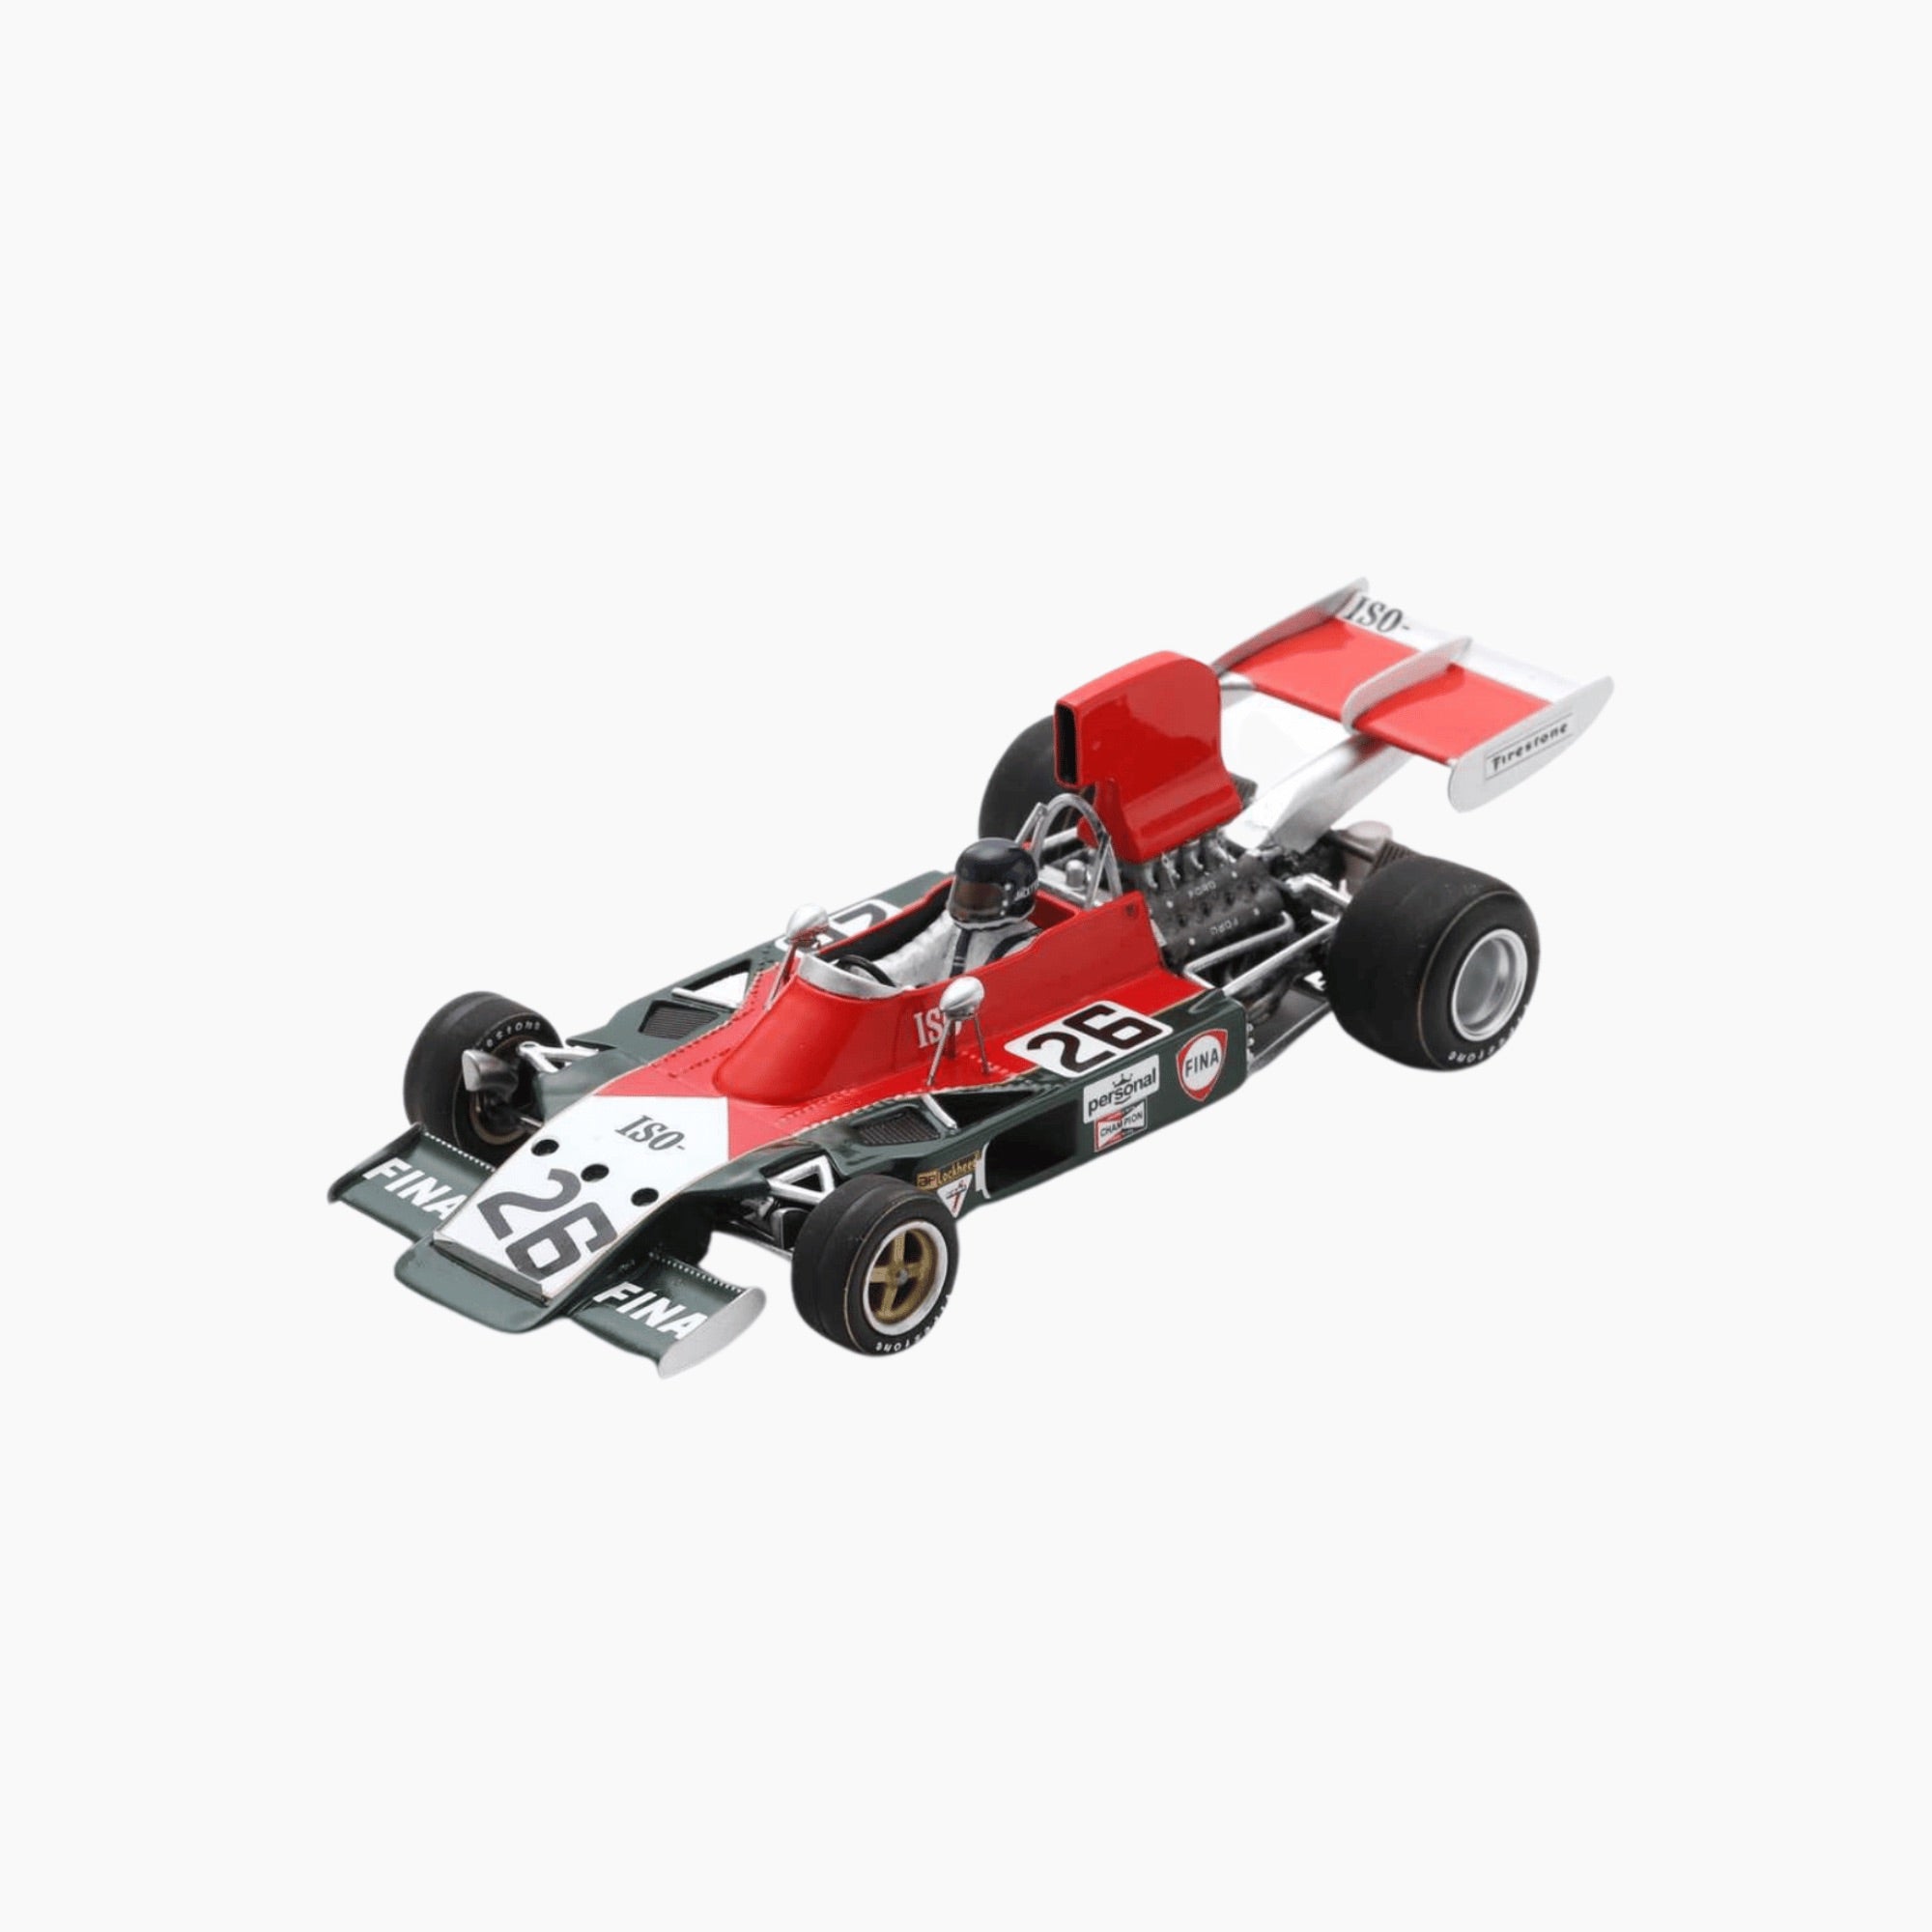 Iso IR US GP 1973 | 1:43 Scale Model-1:43 Scale Model-Spark Models-gpx-store